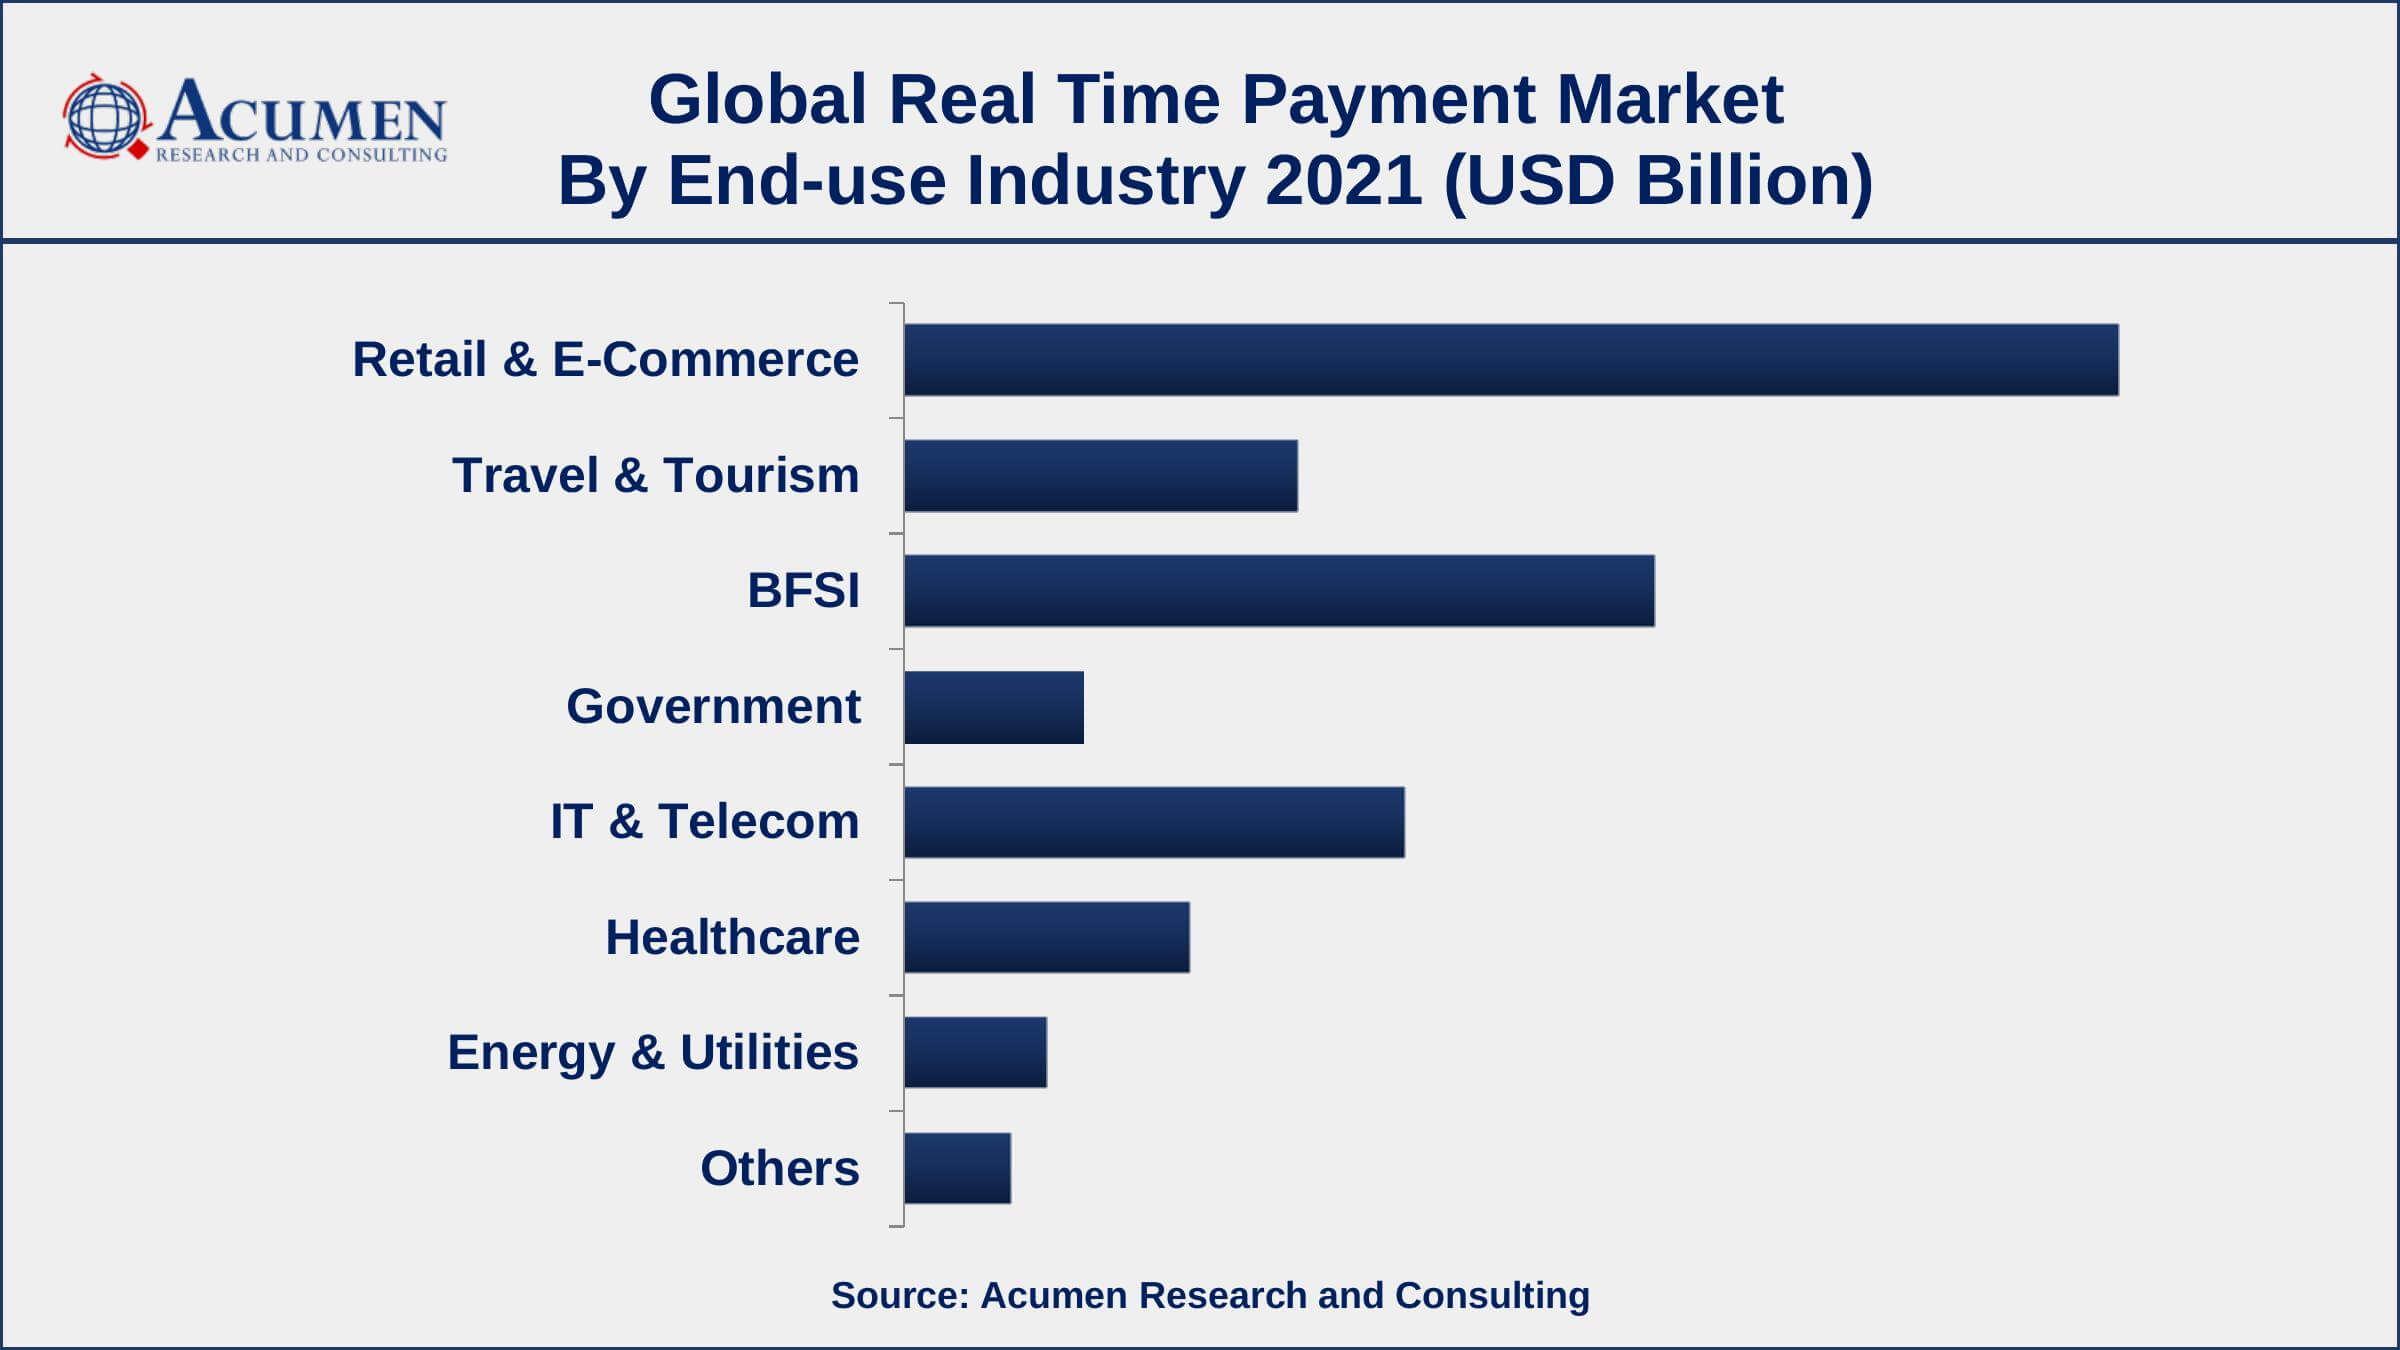 Asia-Pacific Holds Dominating Share Of Real Time Payment Market